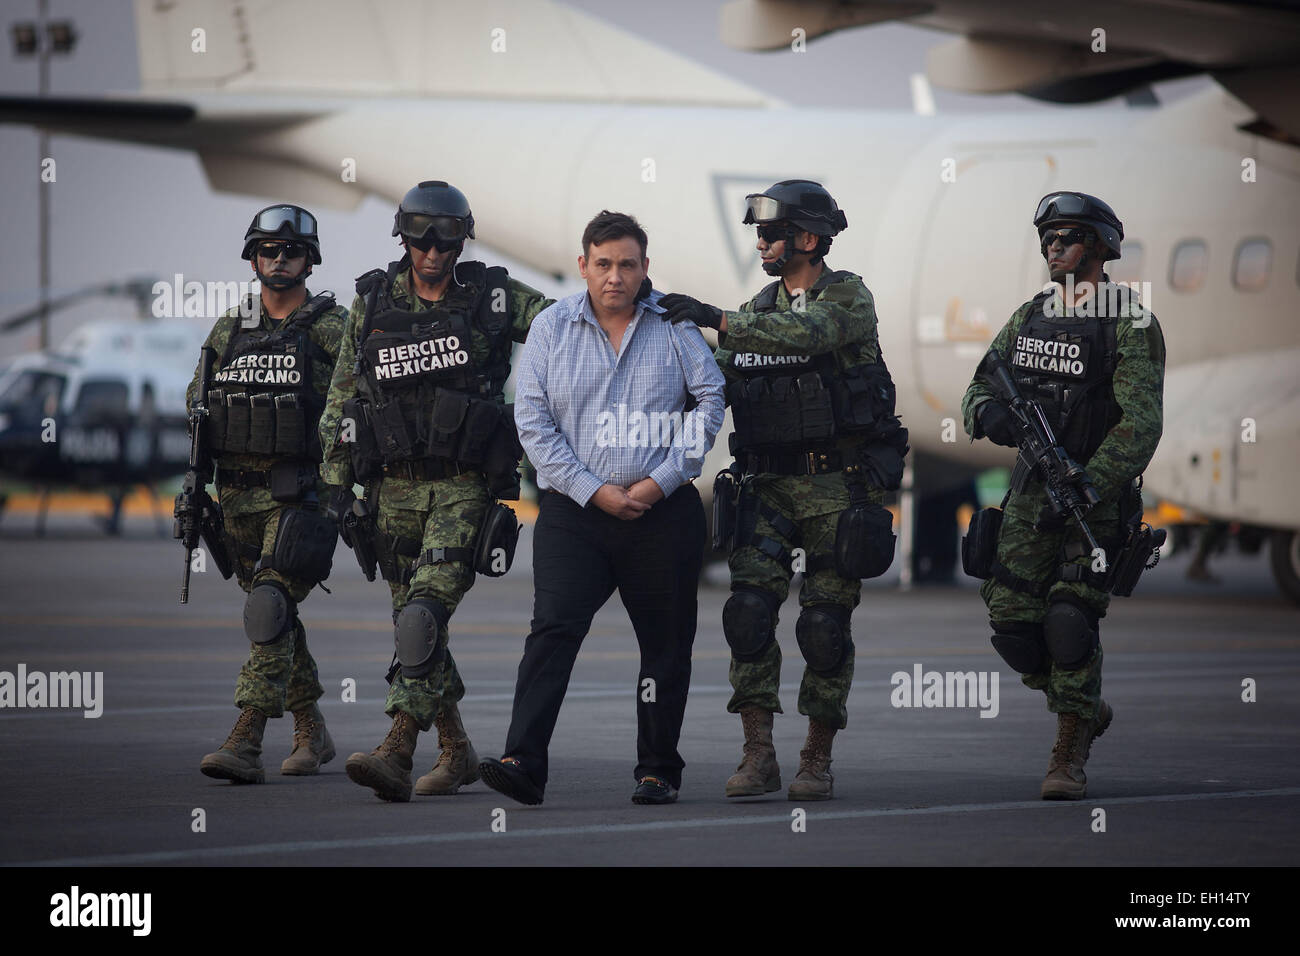 Mexico City, Mexico. 4th Mar, 2015. Mexican Army personnel escort Omar Trevino Morales (C) in Mexico City, capital of Mexico, on March 4, 2015. Mexican authorities on Wednesday arrested the head of the country's northern Los Zetas drug cartel, Omar Trevino Morales. © Pedro Mera/Xinhua/Alamy Live News Stock Photo